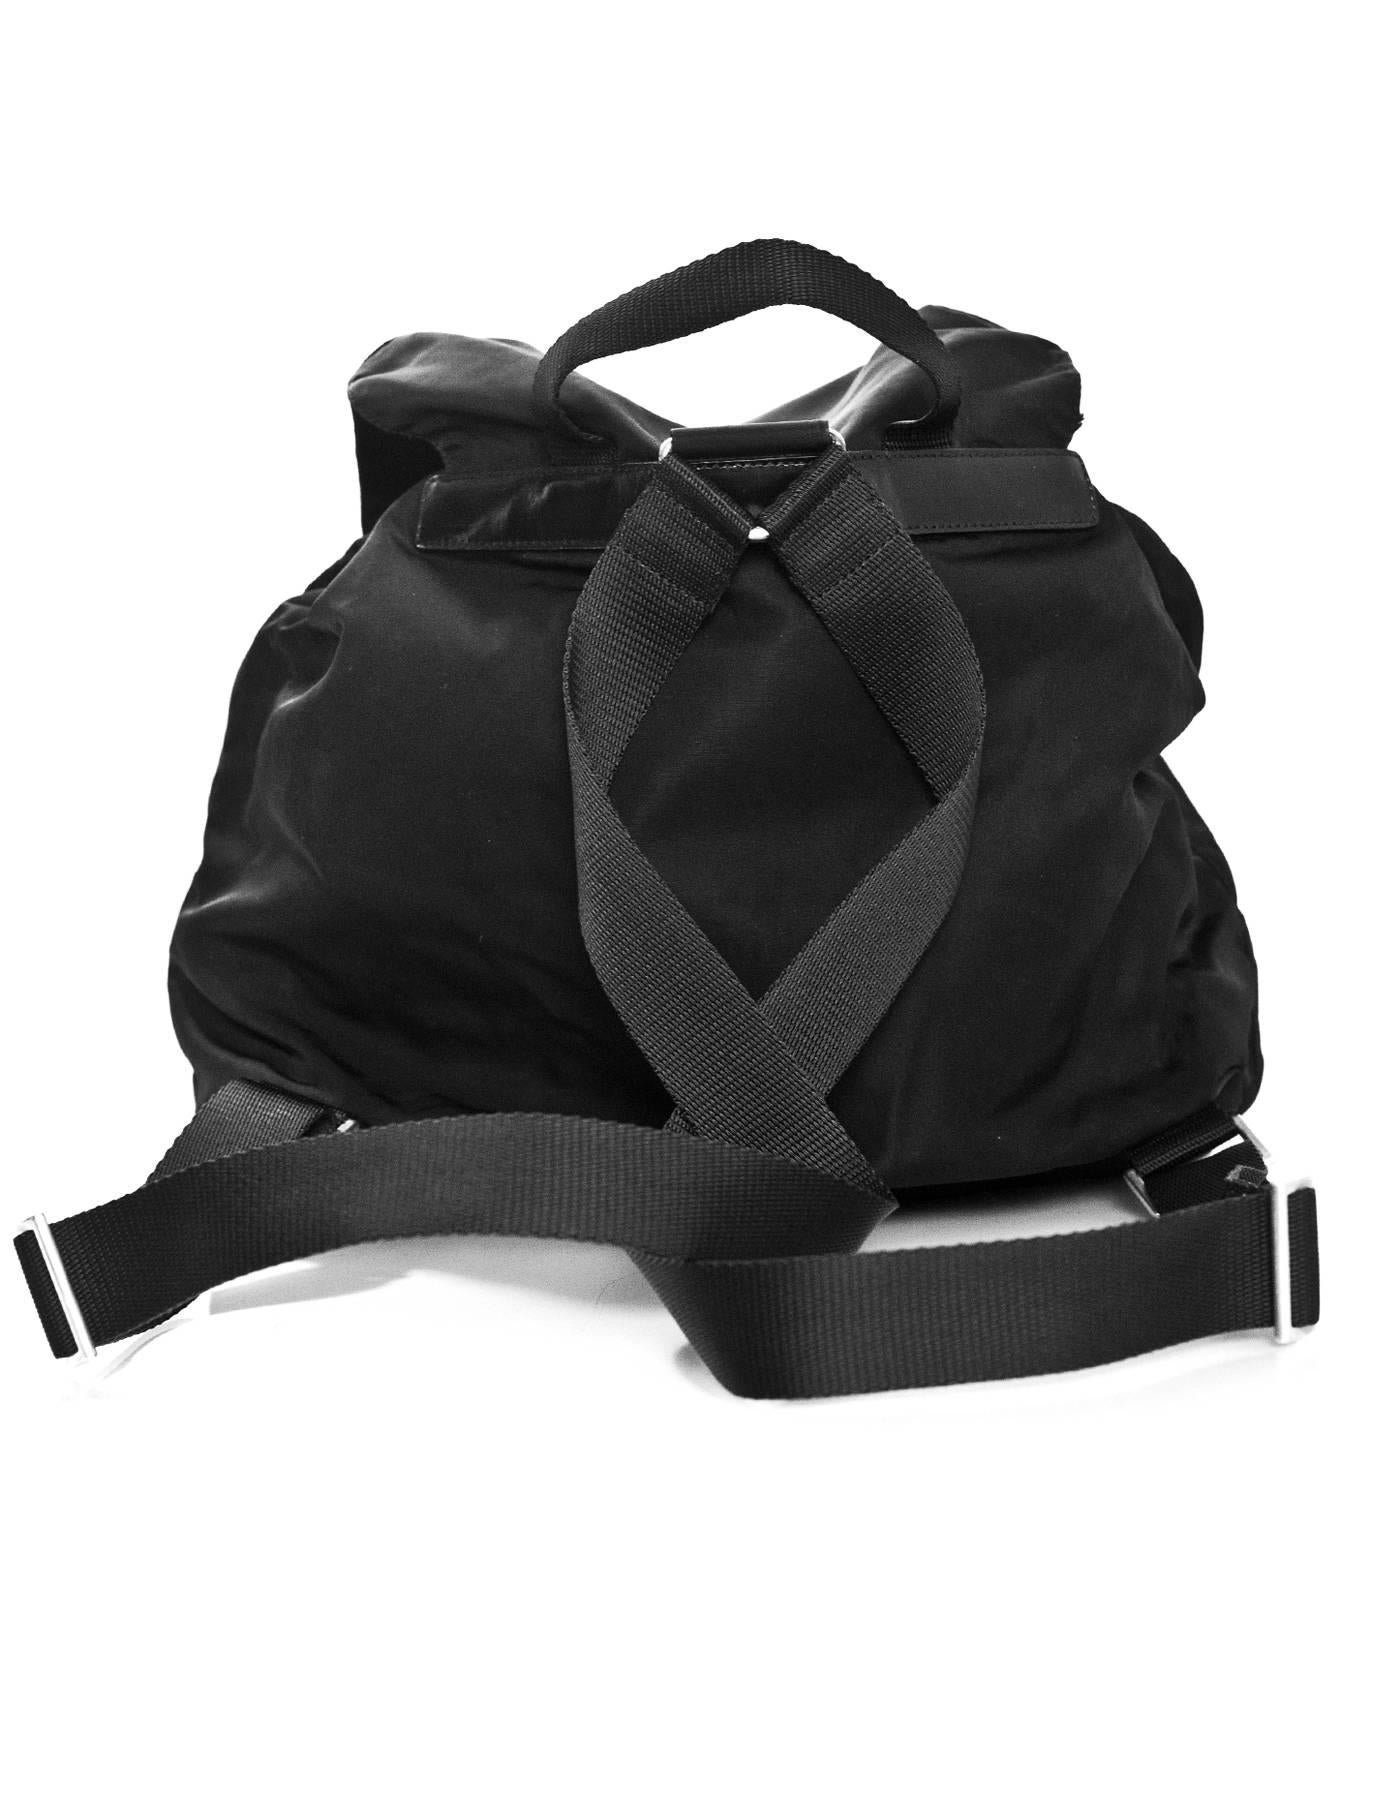 Prada Black Tessuto & Leather Trim Backpack

Made In: Italy
Color: Black
Hardware: Silver
Materials: Tessuto nylon, leather, metal
Lining: Black textile
Closure/Opening: Drawstring with flap top and buckle closure
Exterior Pockets: Two front